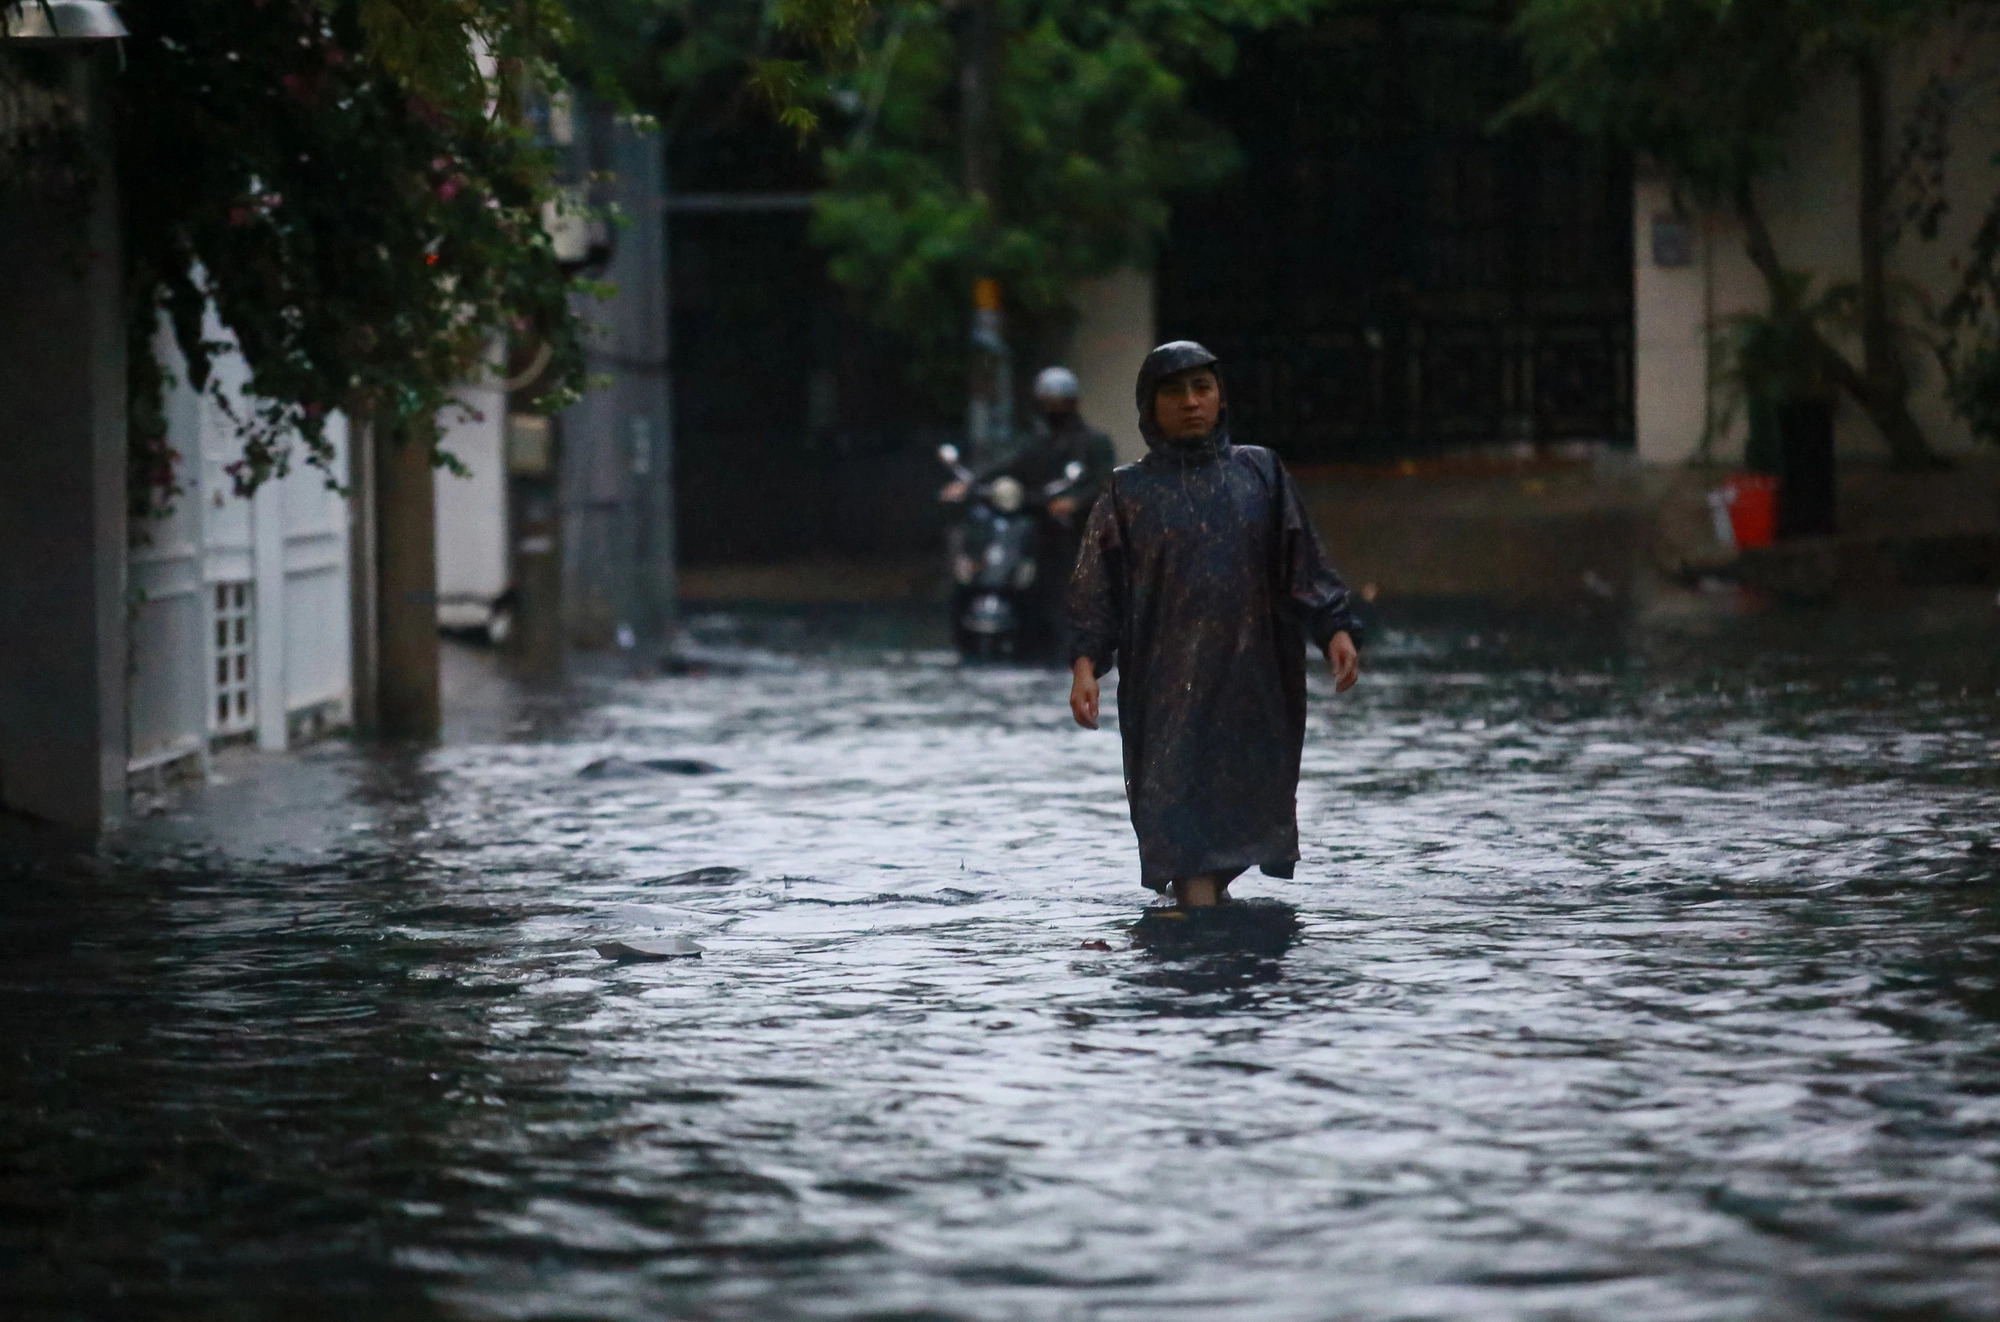 Roads and alleys in the vicinity of Quoc Huong Street in Thao Dien Ward, Thu Duc City under Ho Chi Minh City are submerged under water due to heavy rainfall on July 3, 2024. Photo: Chau Tuan / Tuoi Tre